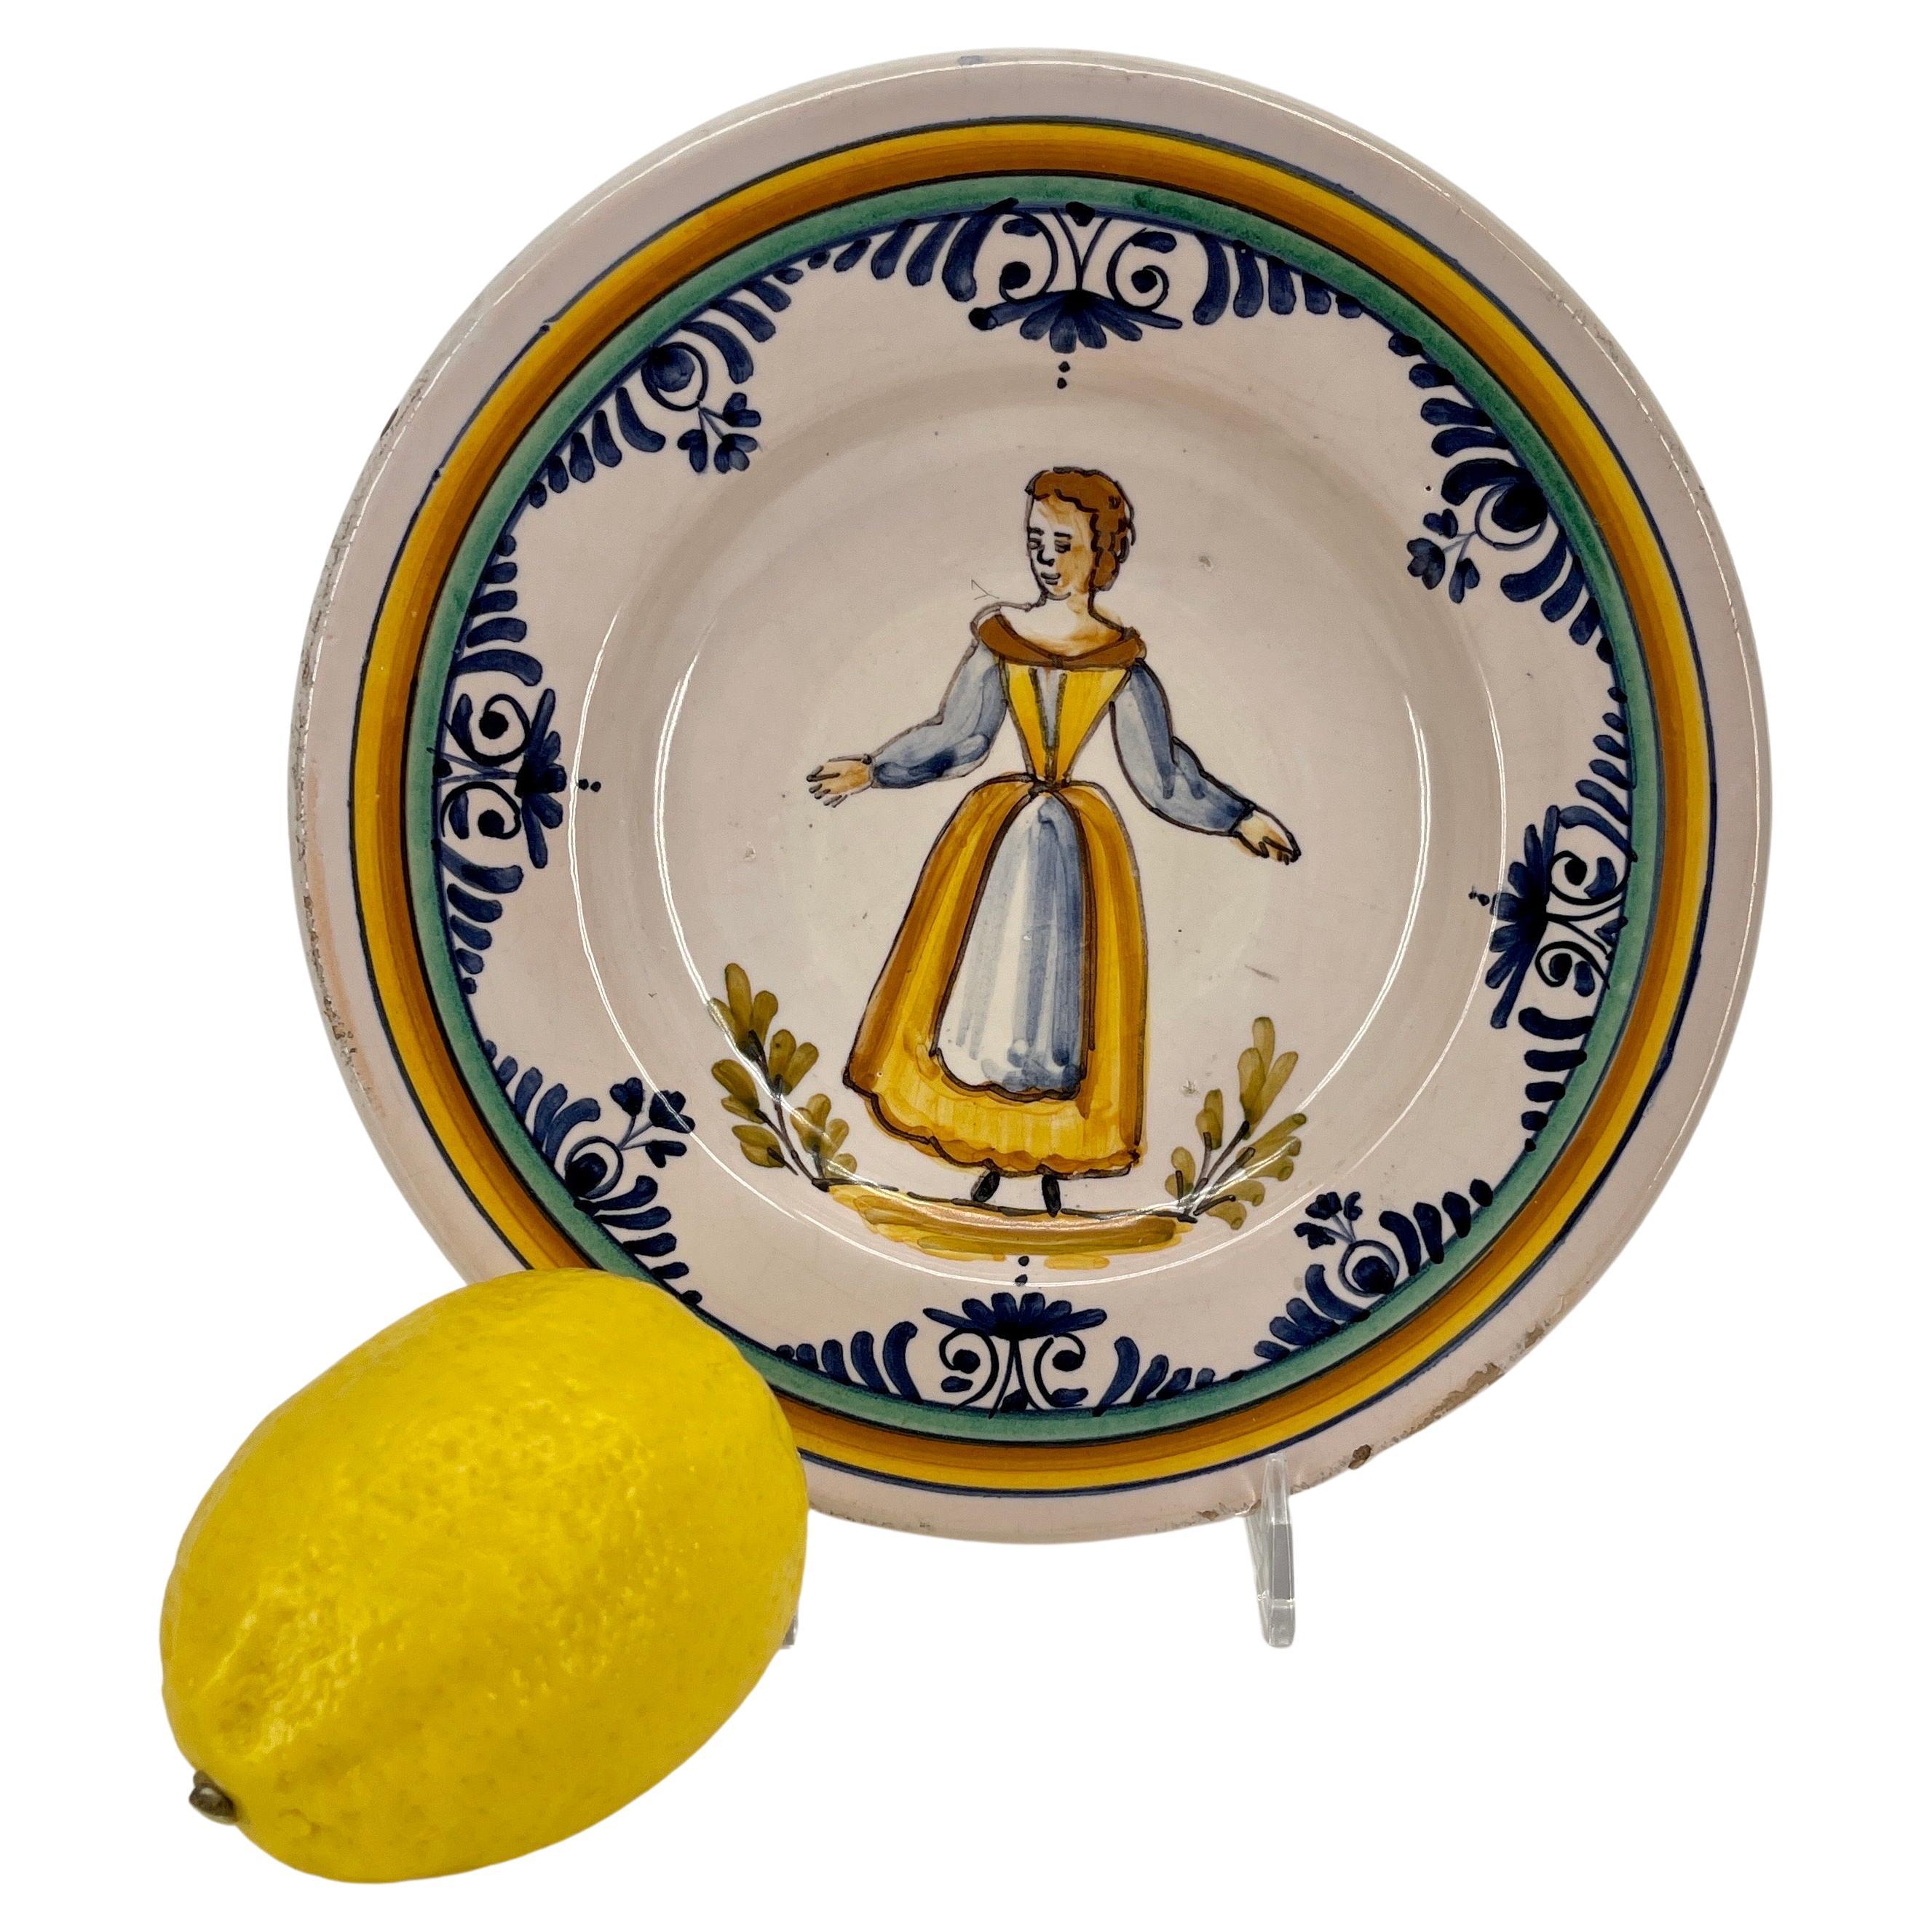  1920's Faience Dish Of a Lady, Italy 

Charming Italian dishes of a a figurative woman representative of the 1920's era in Florence, Italy. This  would a wonderful display piece on a table or bookshelf.